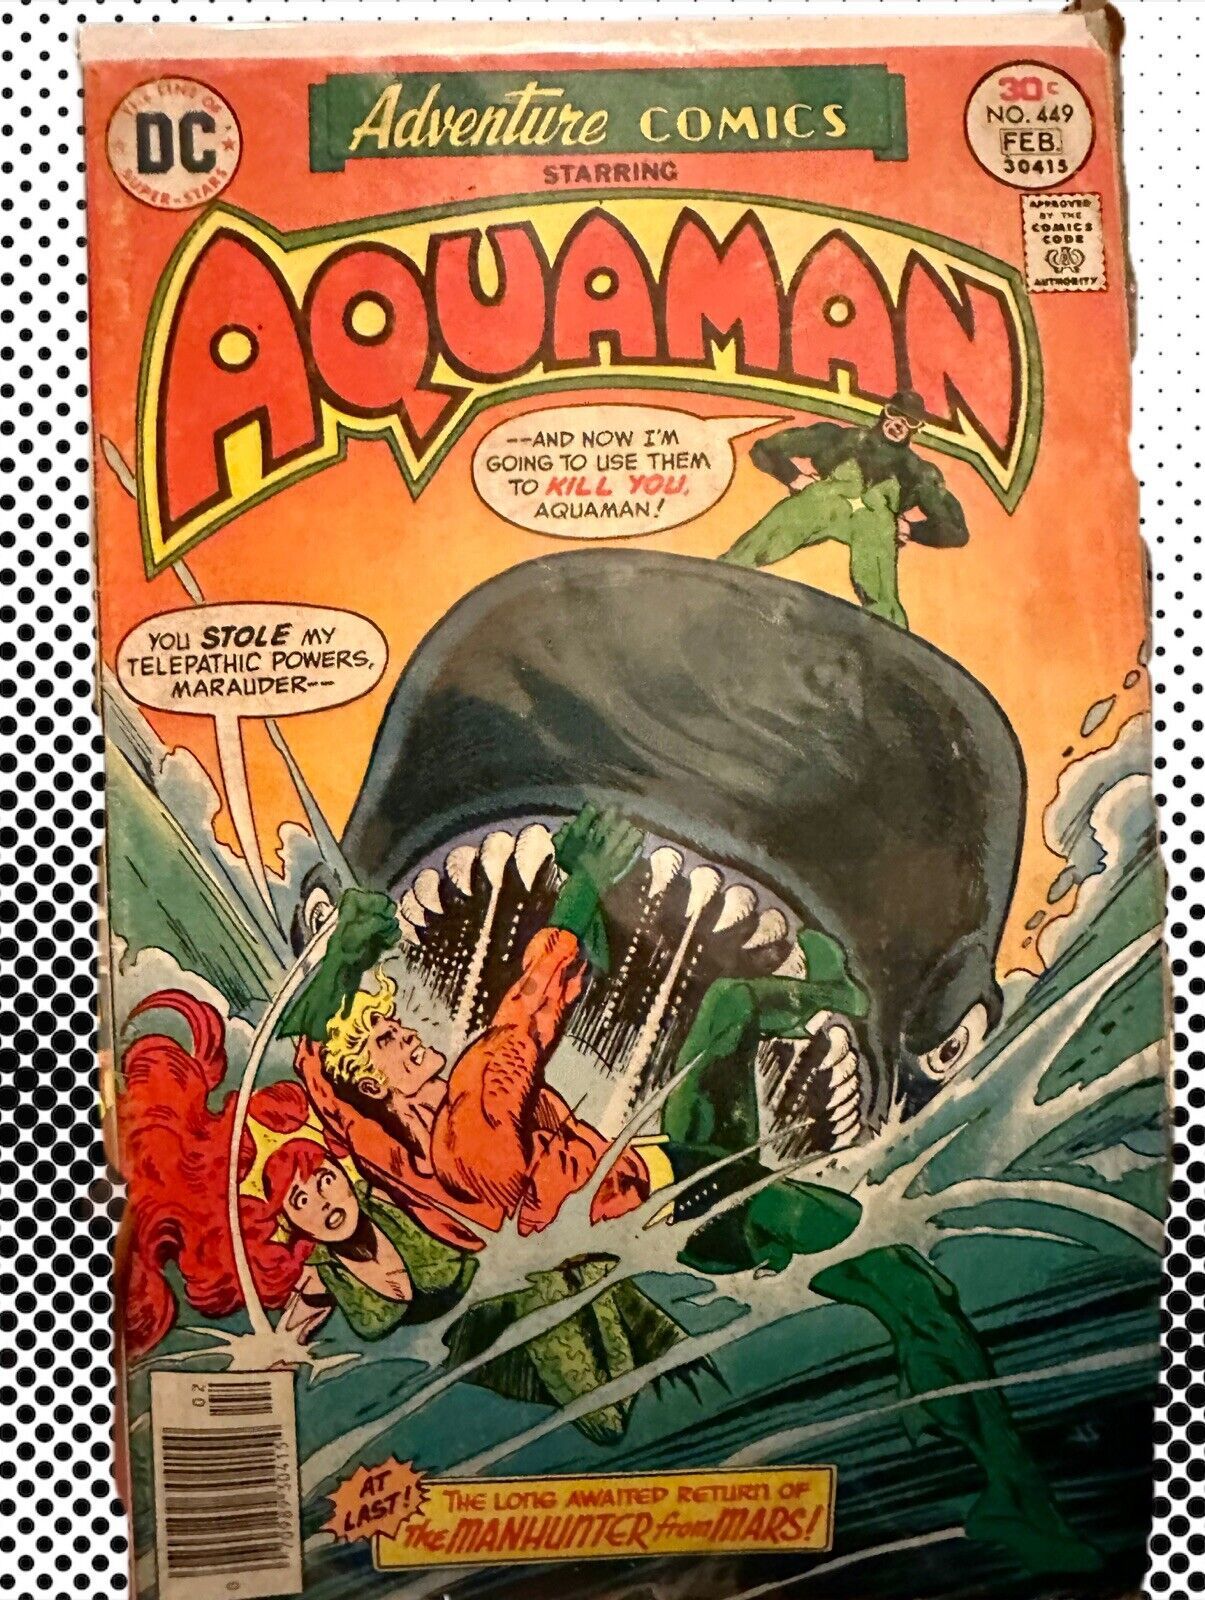 Primary image for Aquaman DC Comics Aquaman #449 Double Feature w/ #57 - 2 Issue Lot